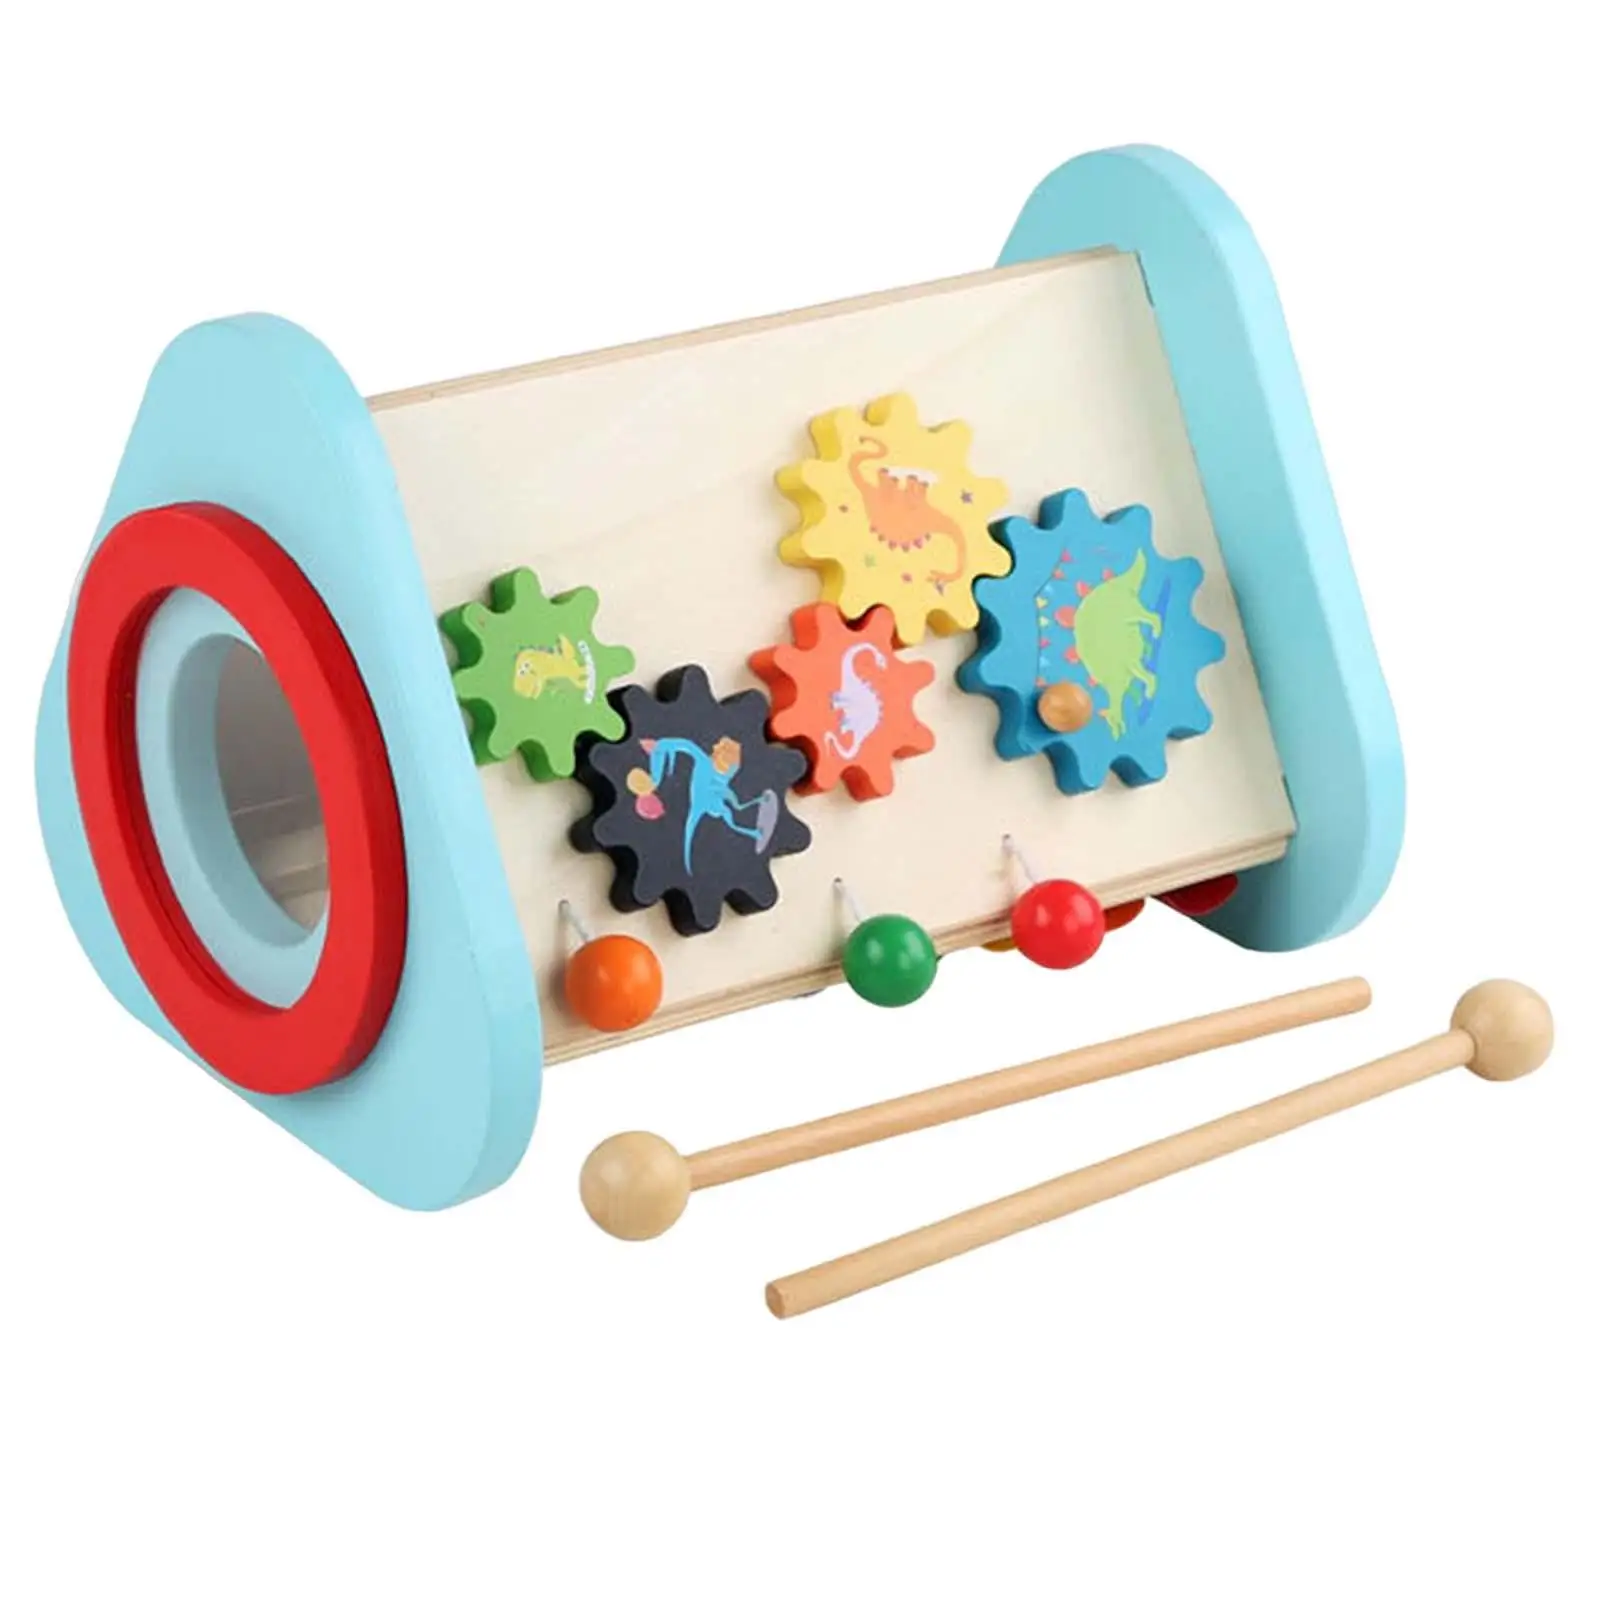 Percussion Instruments Toy Early Learning Sturdy Wooden Multicolor Kids Musical Instrument Toy for Boys Girls Children Gifts